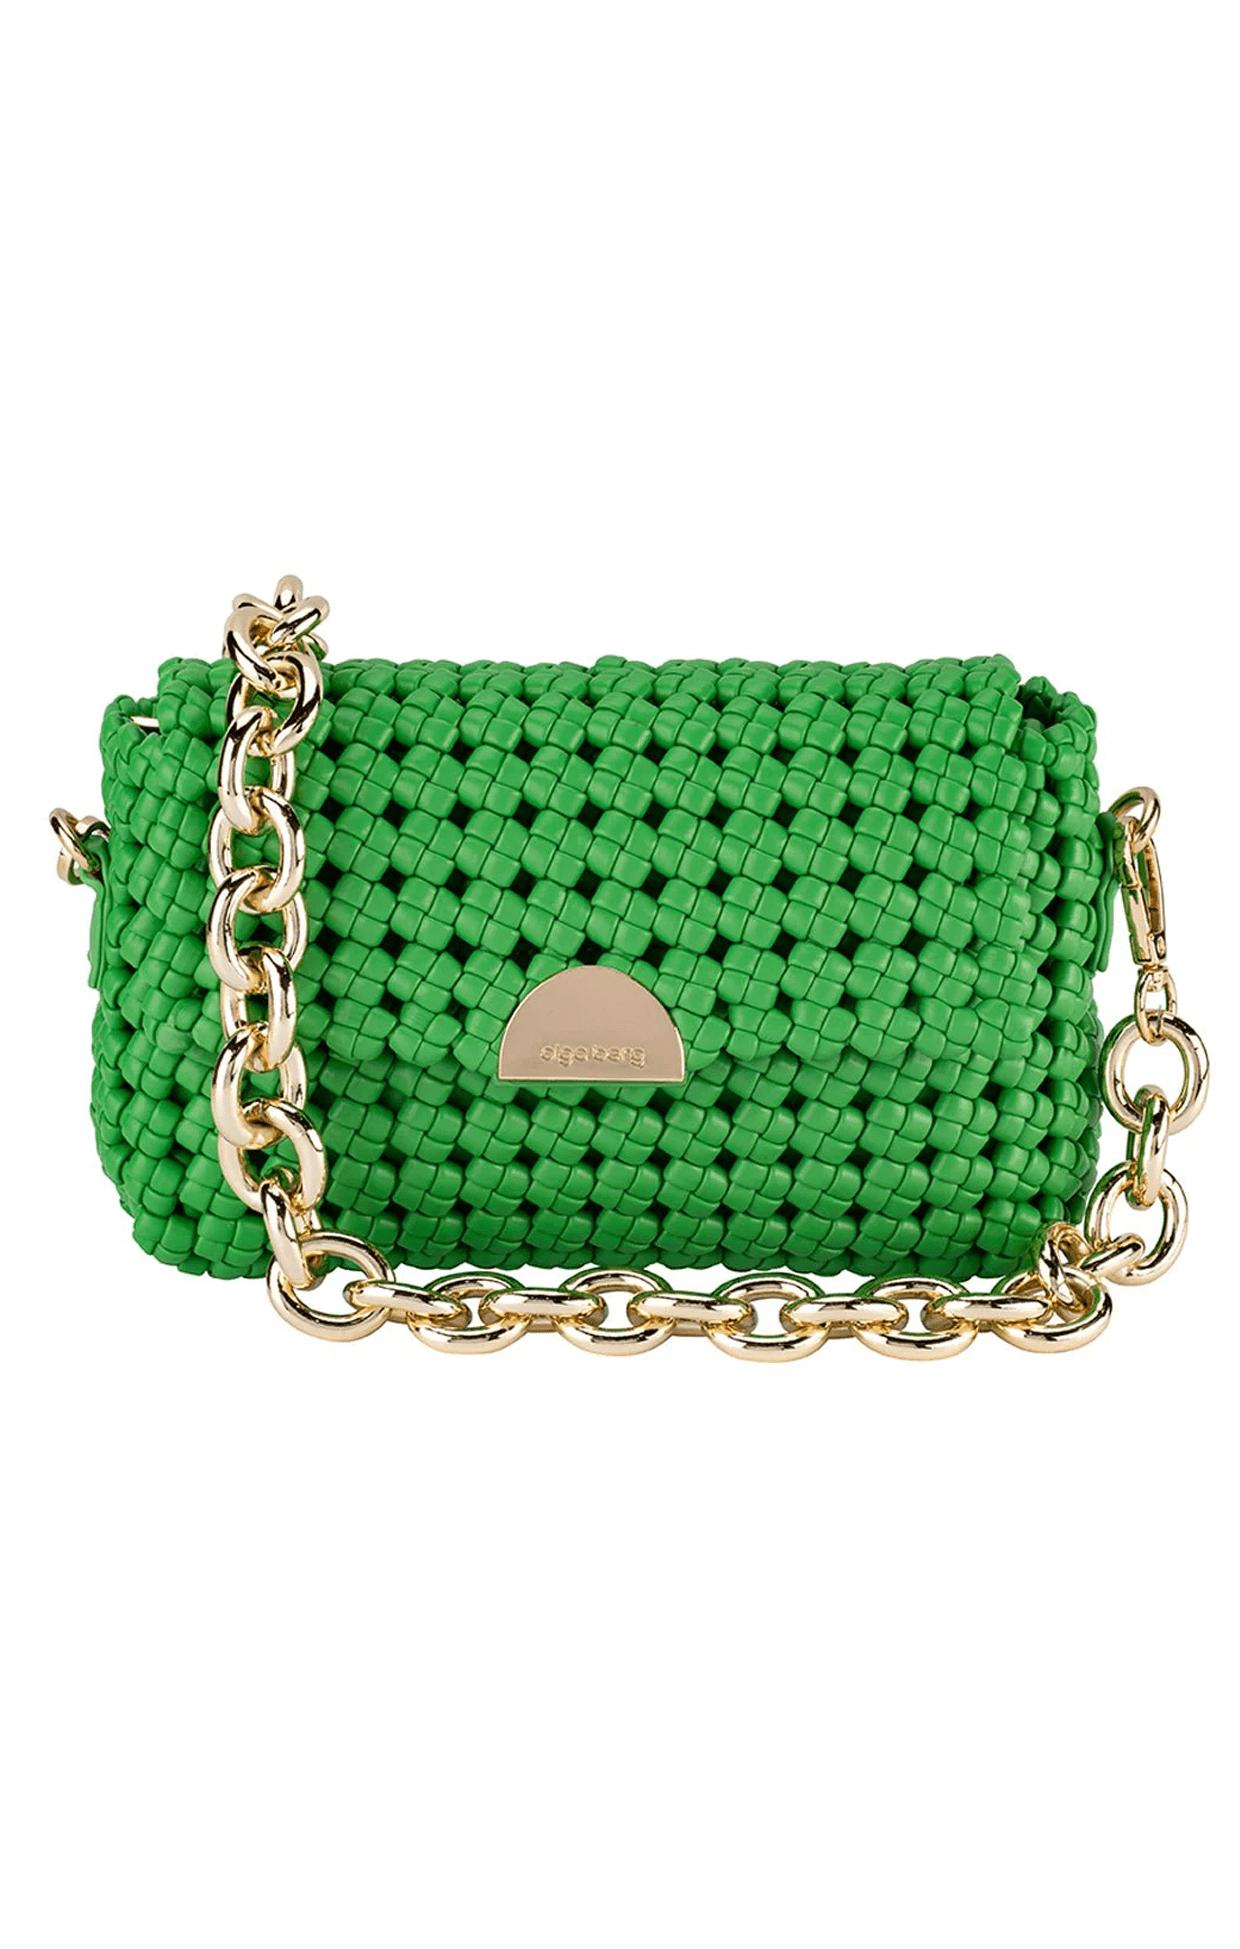 ACCESSORIES Bags Clutches One Size / Green GISELLE WOVEN SHOULDER BAG IN GREEN